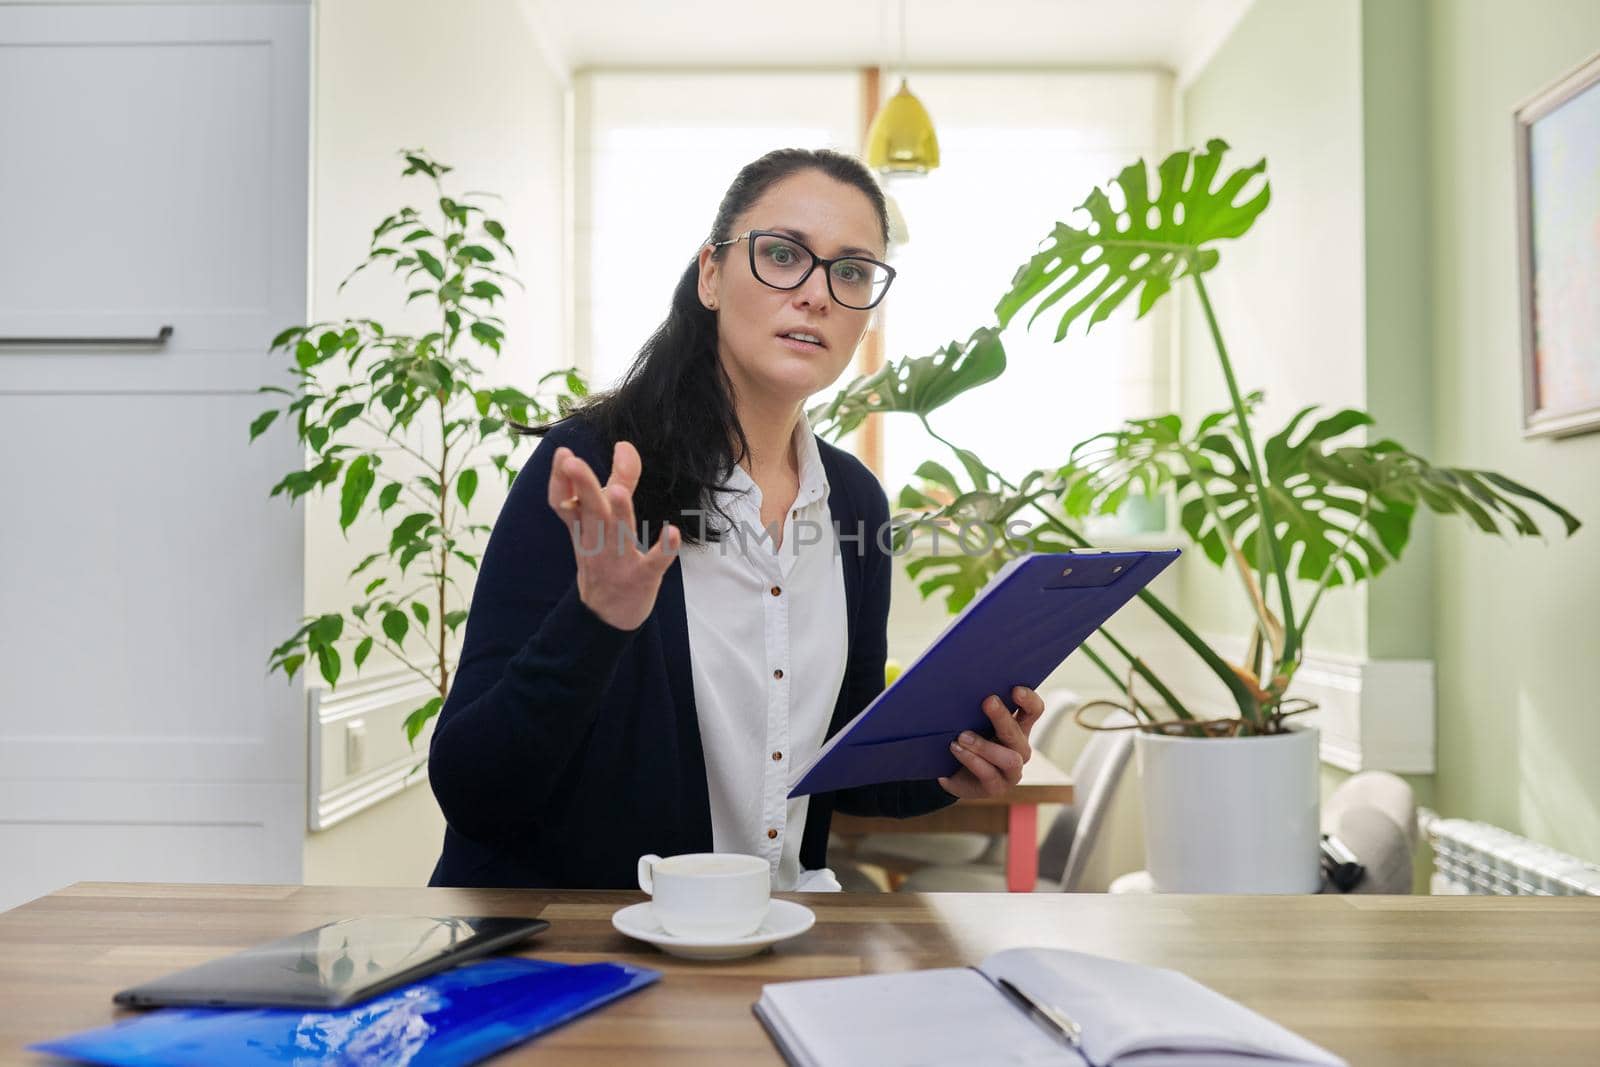 Business woman looking at camera talking, holding papers documents in hands, home interior background. Online consultation, remote work, paperwork, internet, technologies in business, education